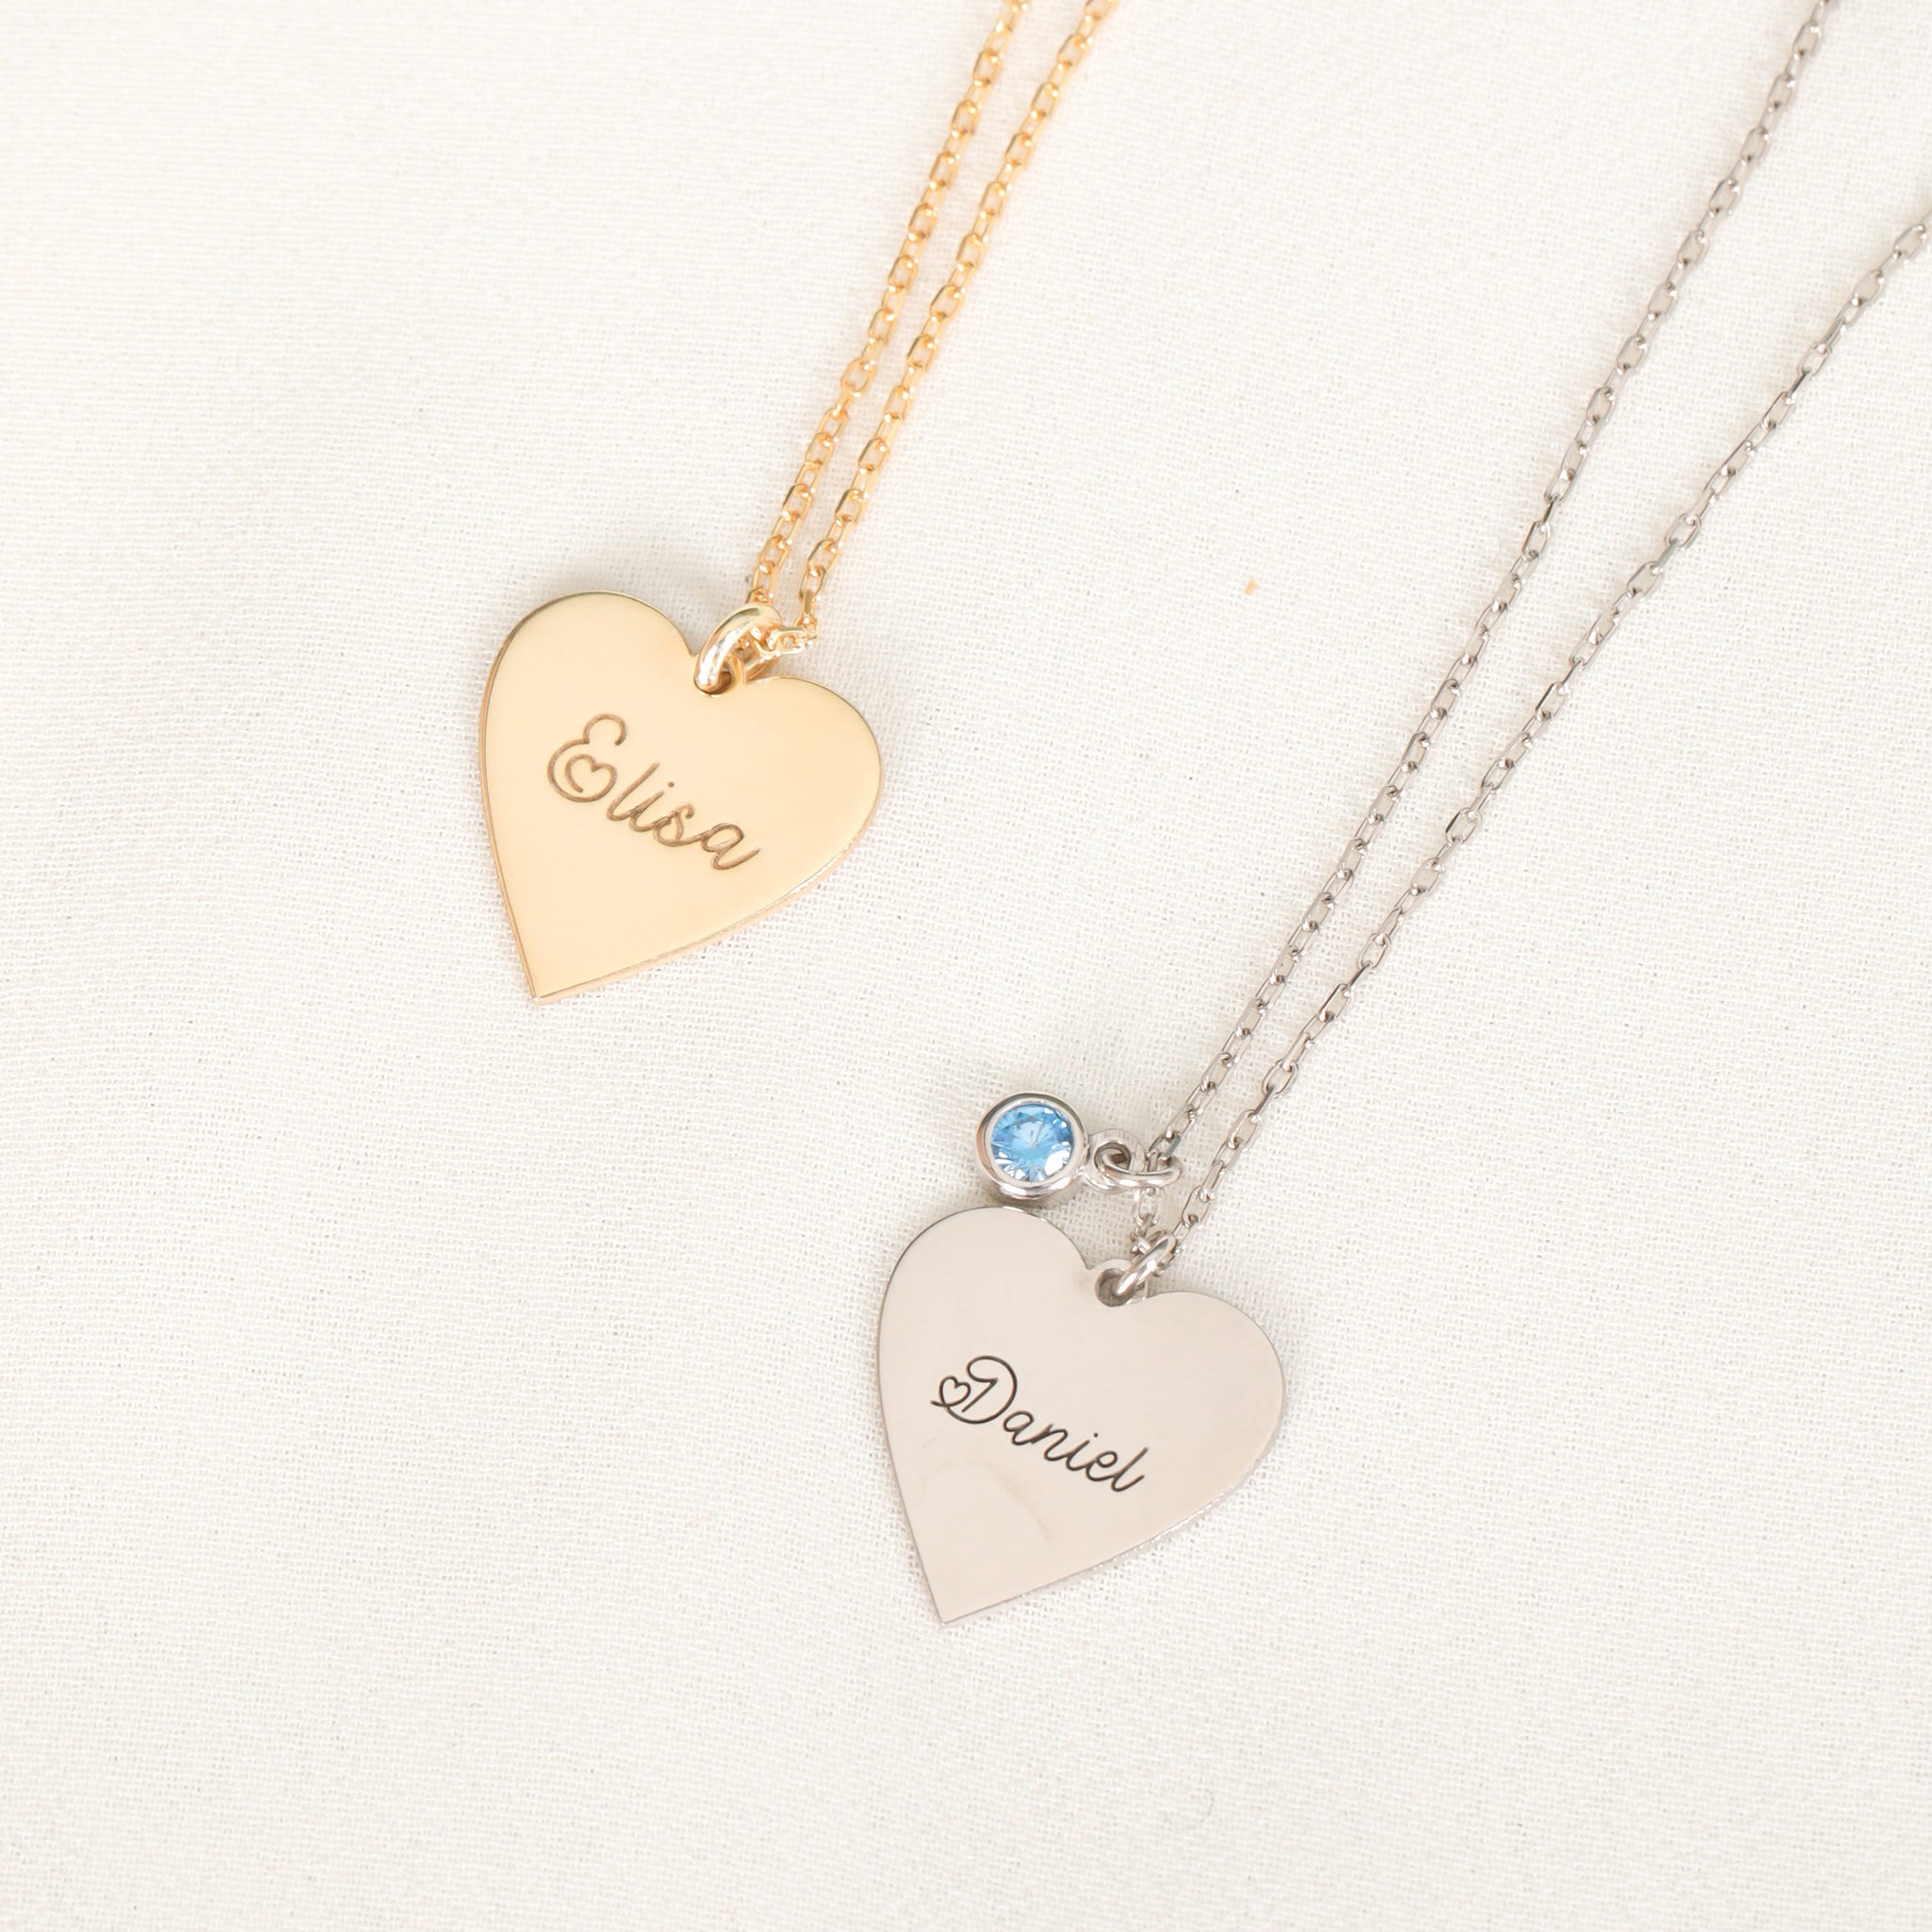 Heart Shape Name Engraved Birthstone Necklace Dainty Gold Filled Personalized Jewelry Name Plate Heart Necklace Mother Day Gift